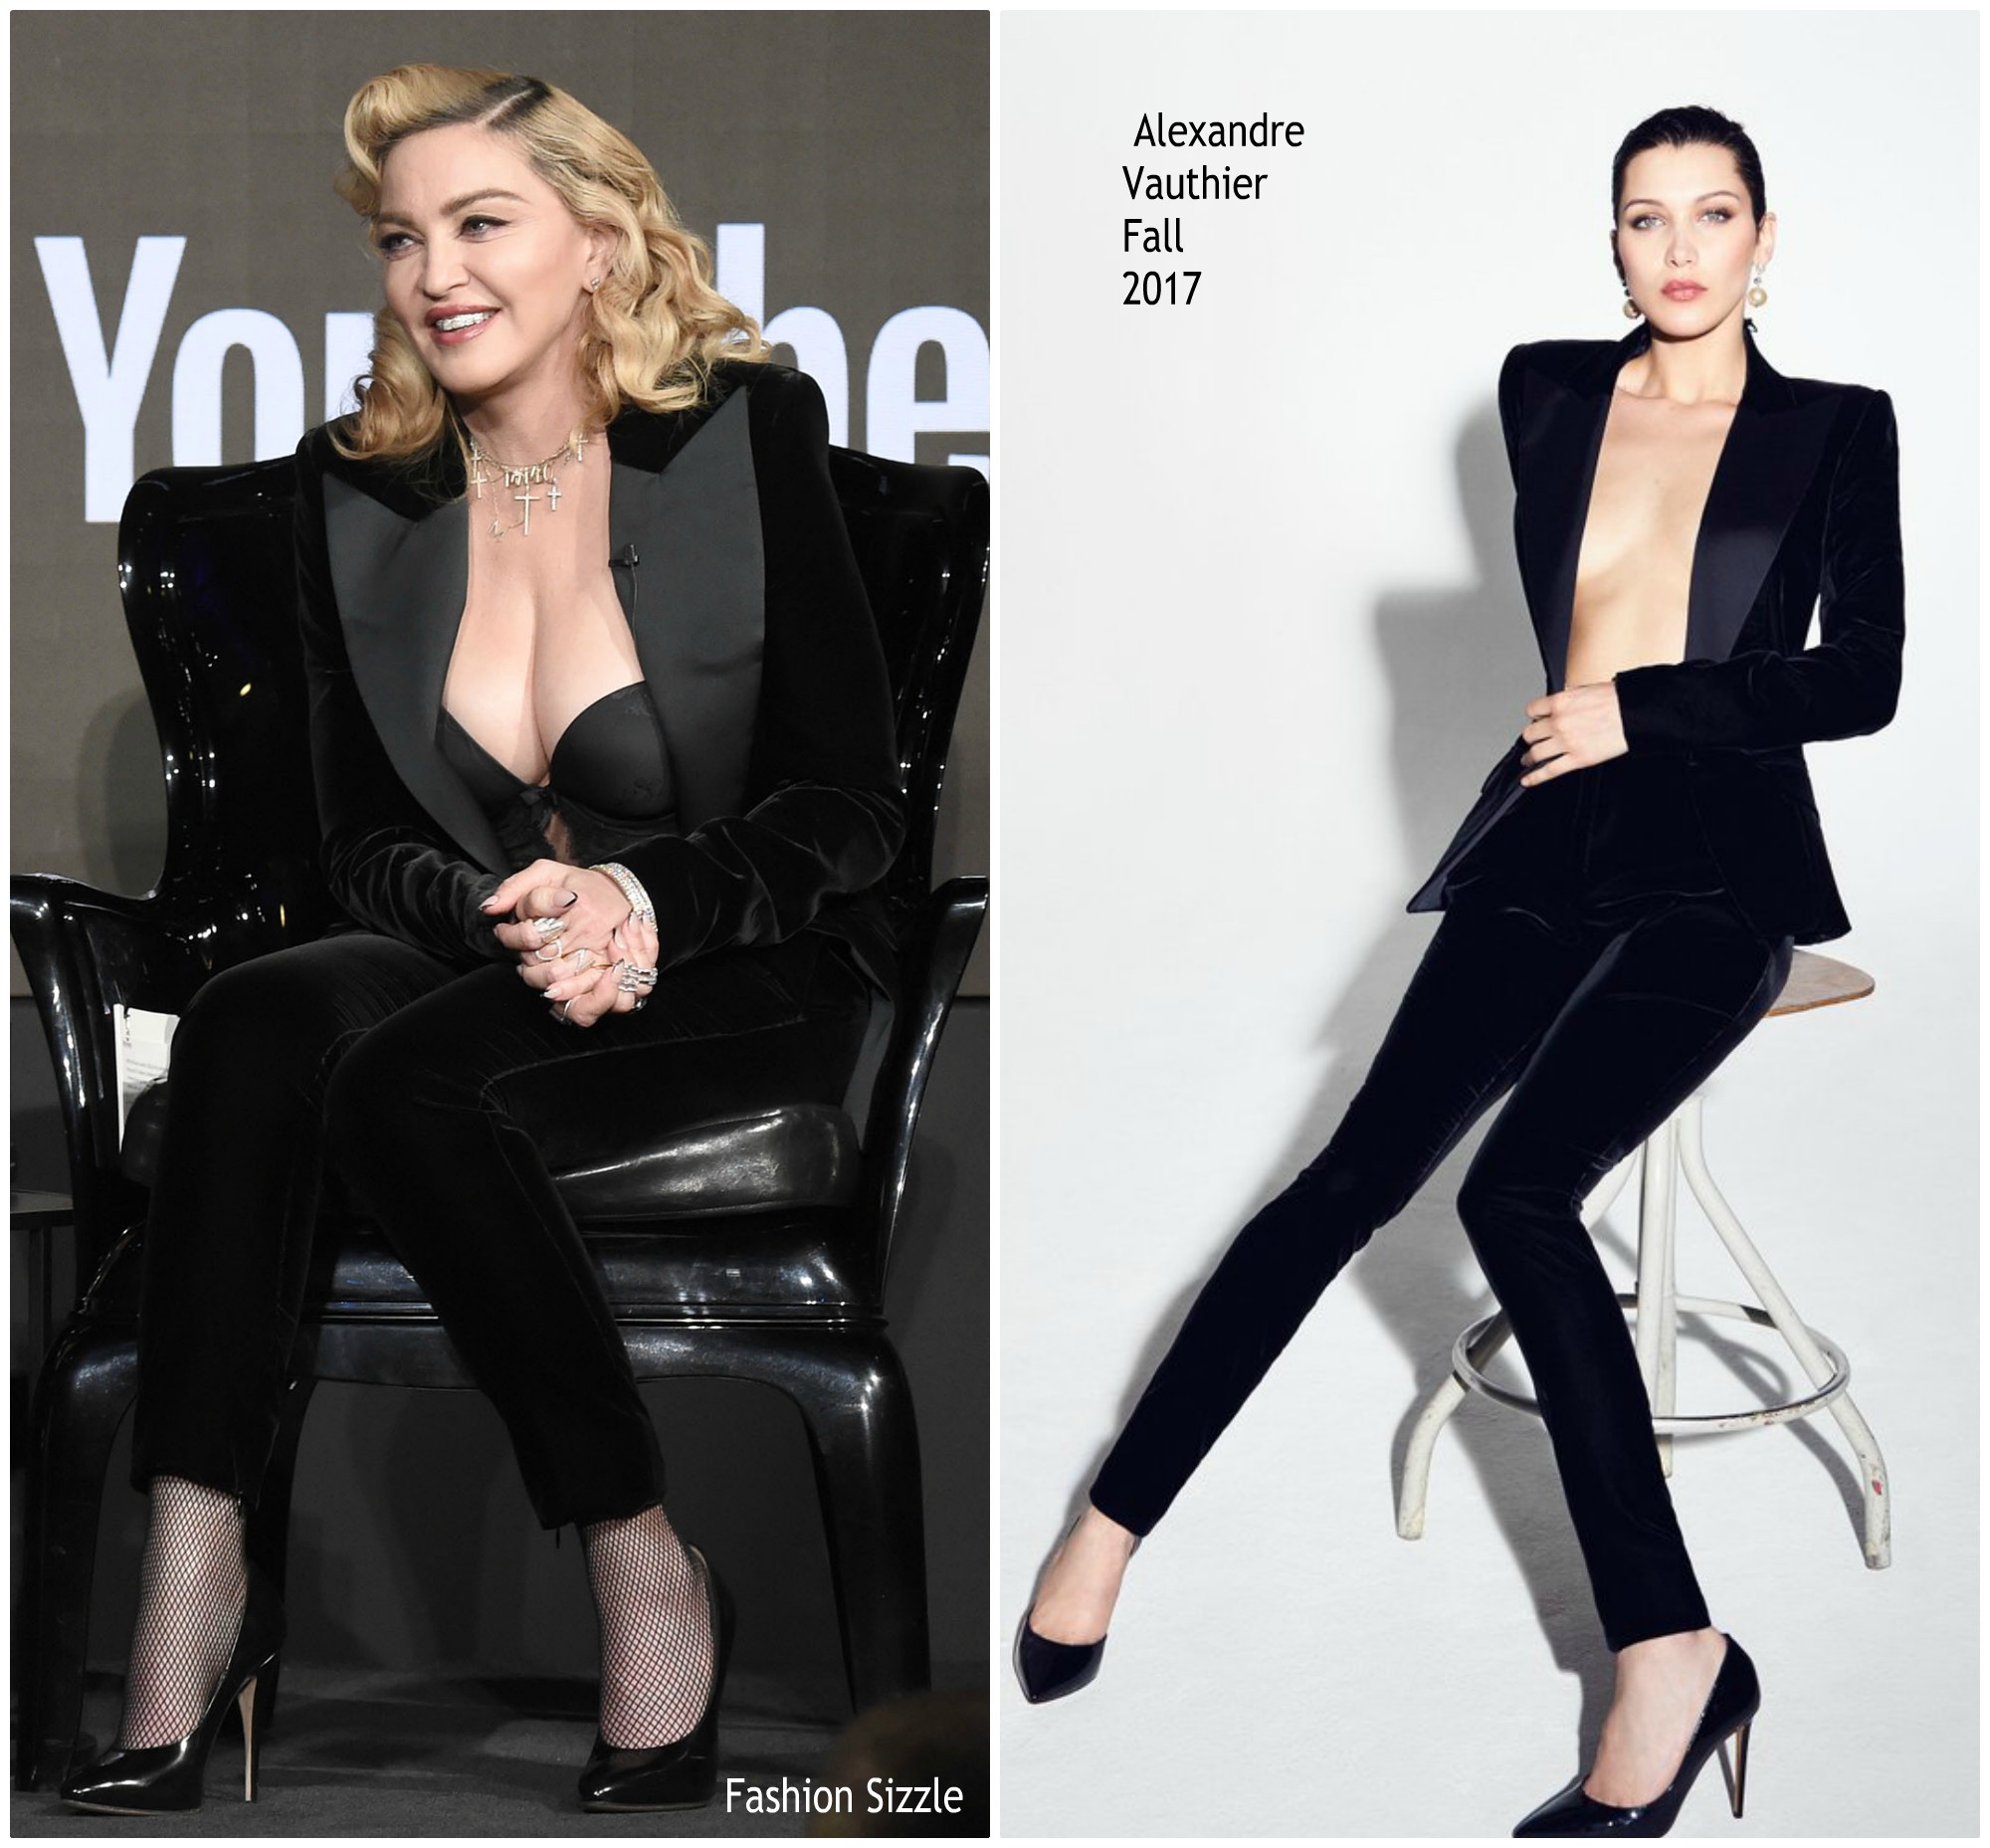 madonna-in-alexandre-vauthier-mdna-skin-x-kkw-beauty-event